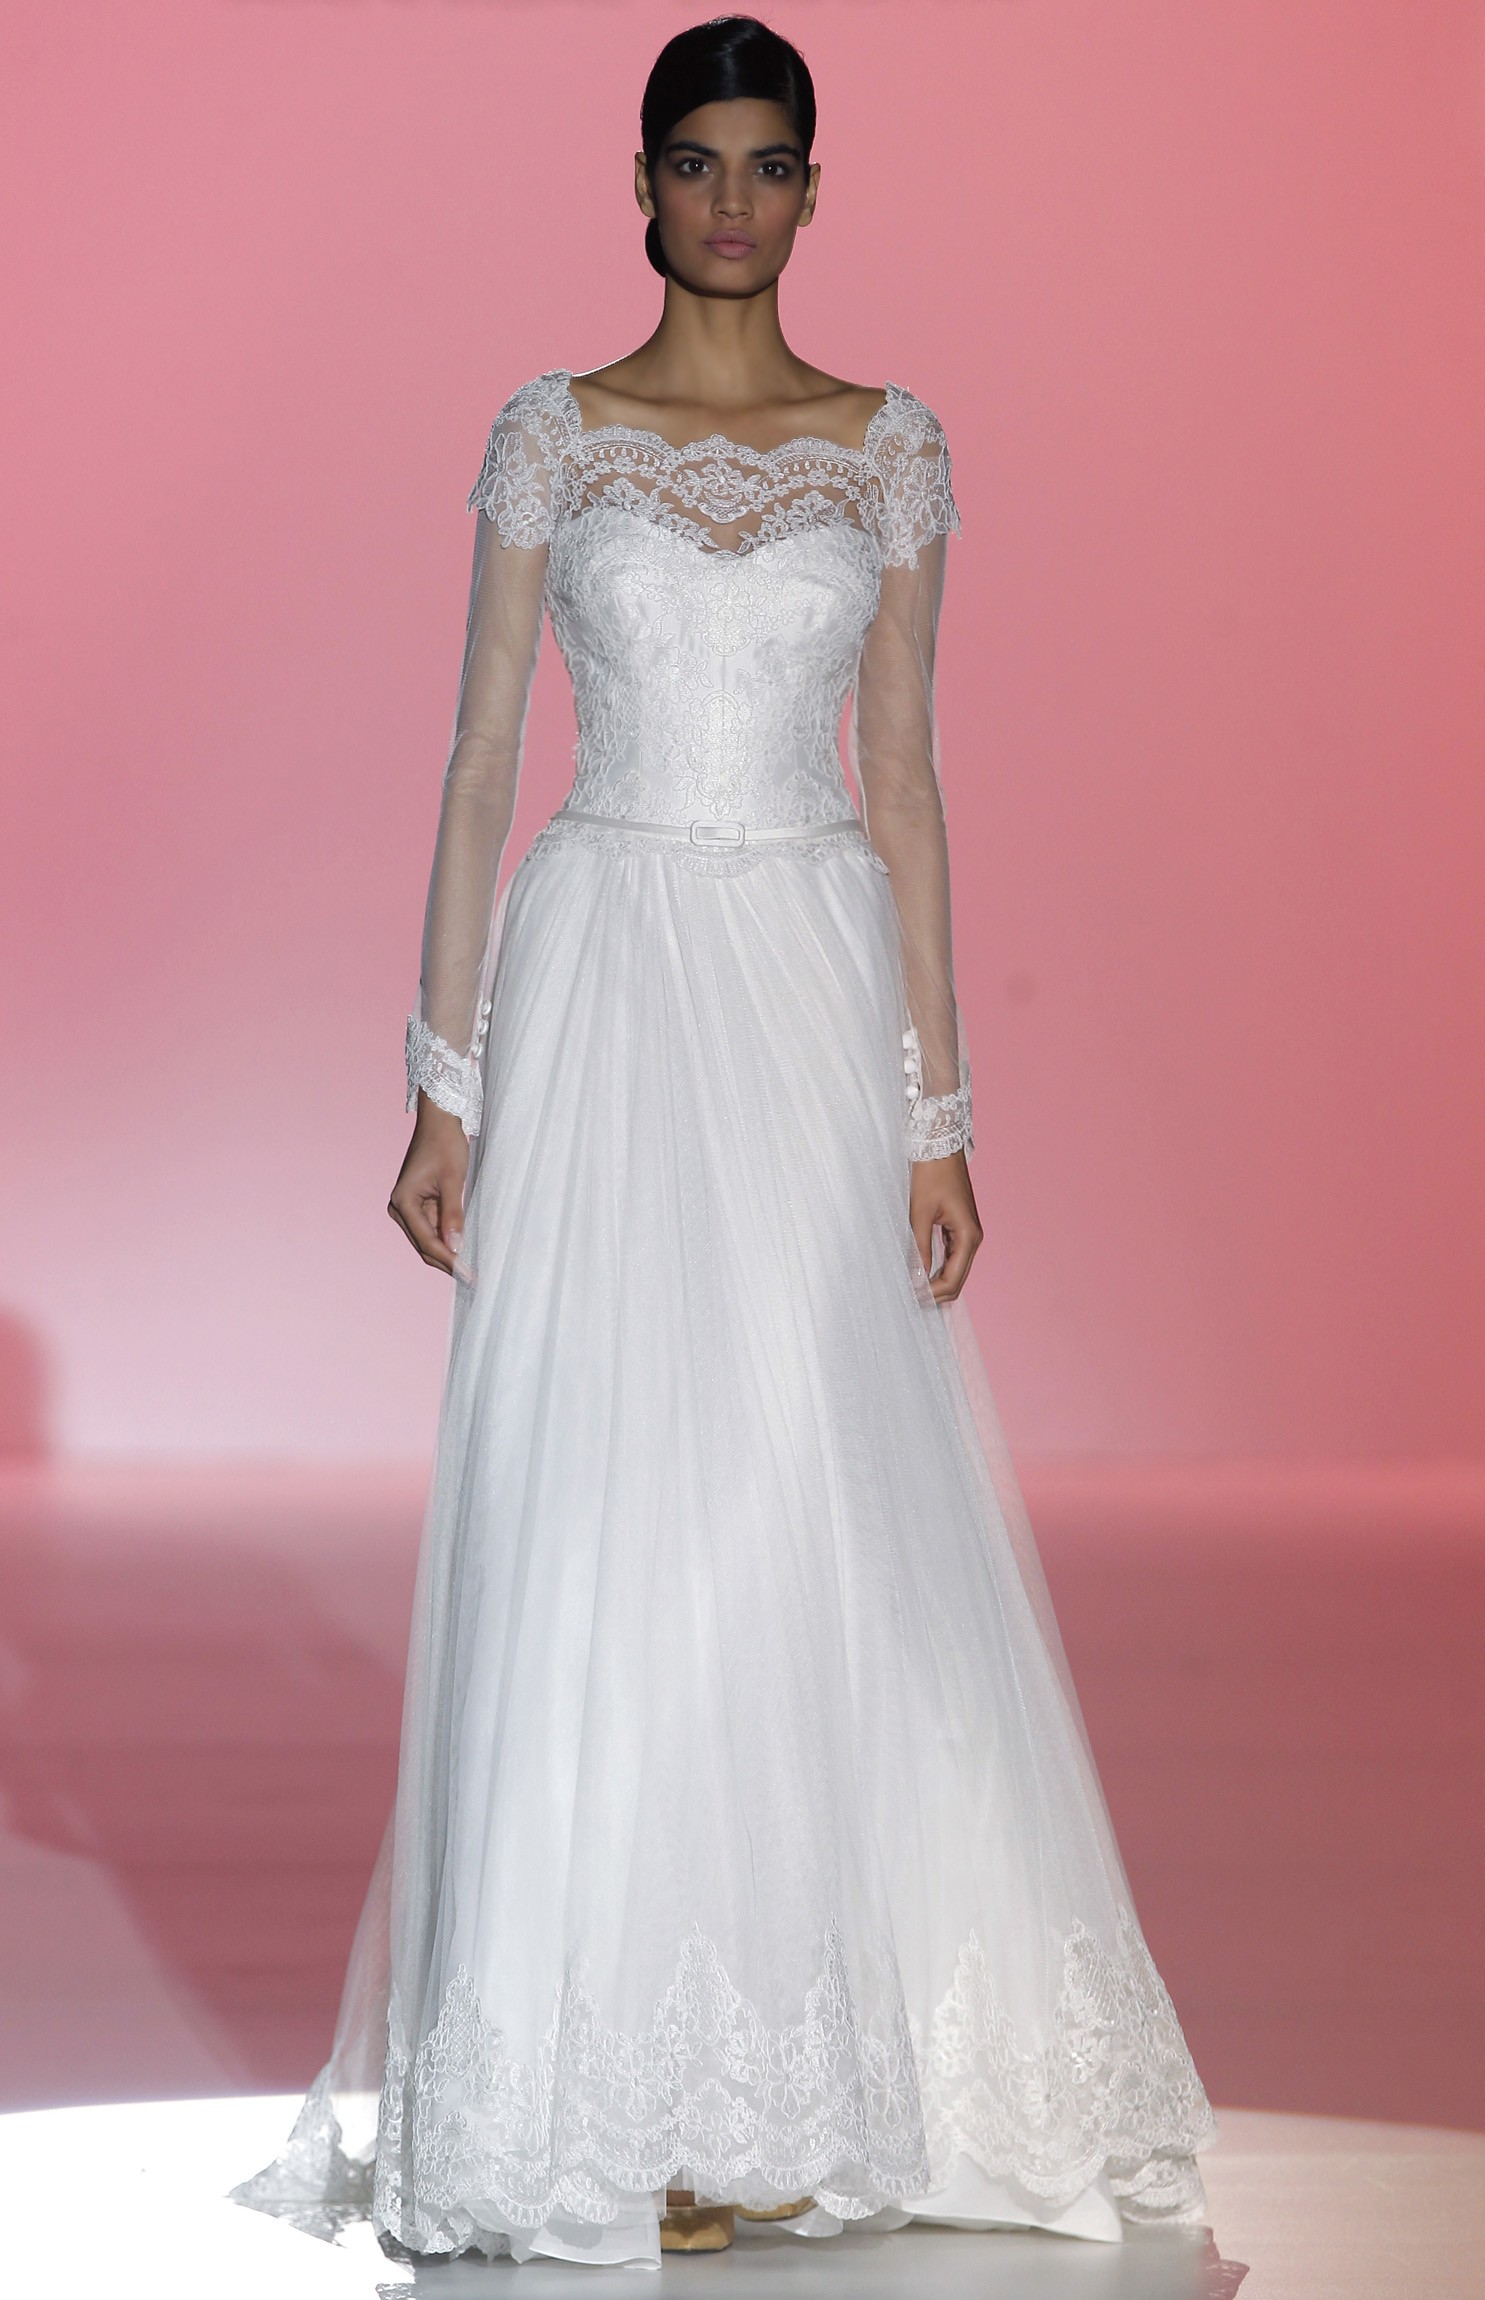 One Day   Bridal Collection 2015 by Hannibal Laguna